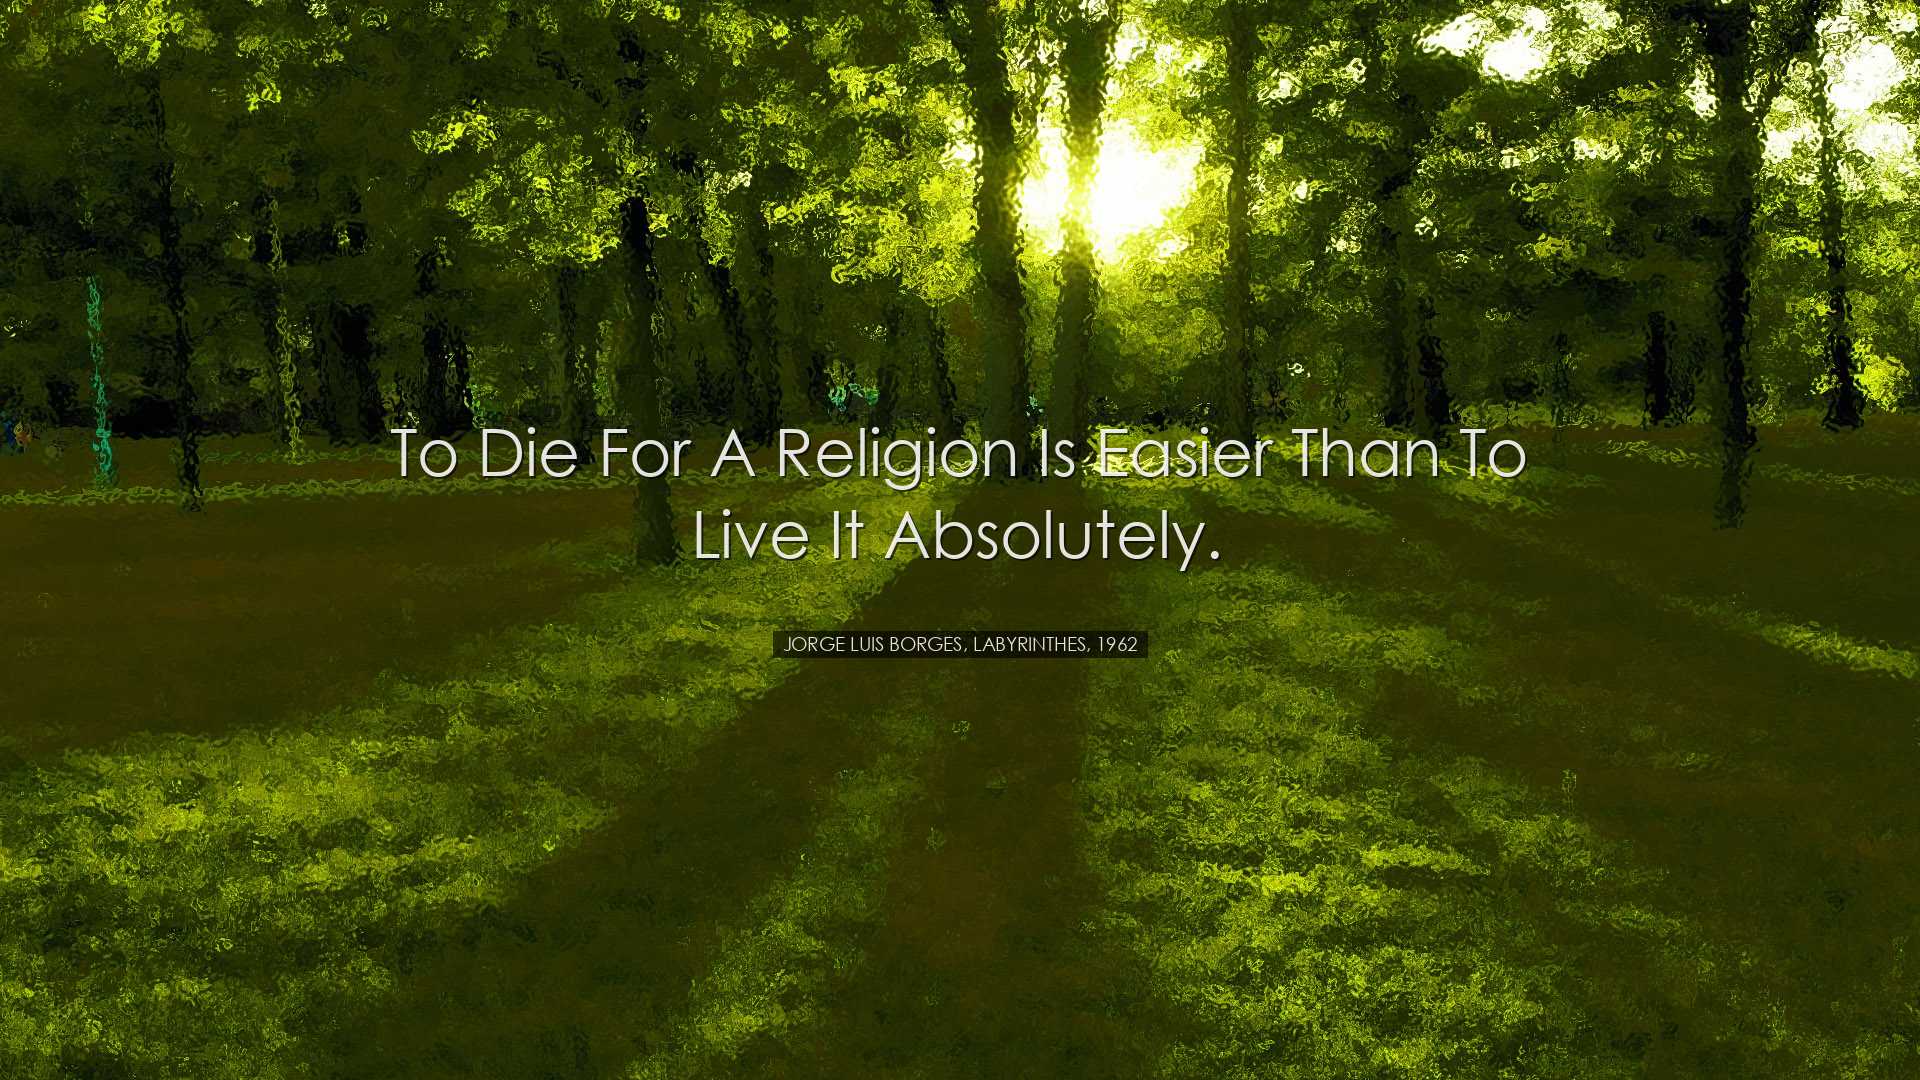 To die for a religion is easier than to live it absolutely. - Jorg